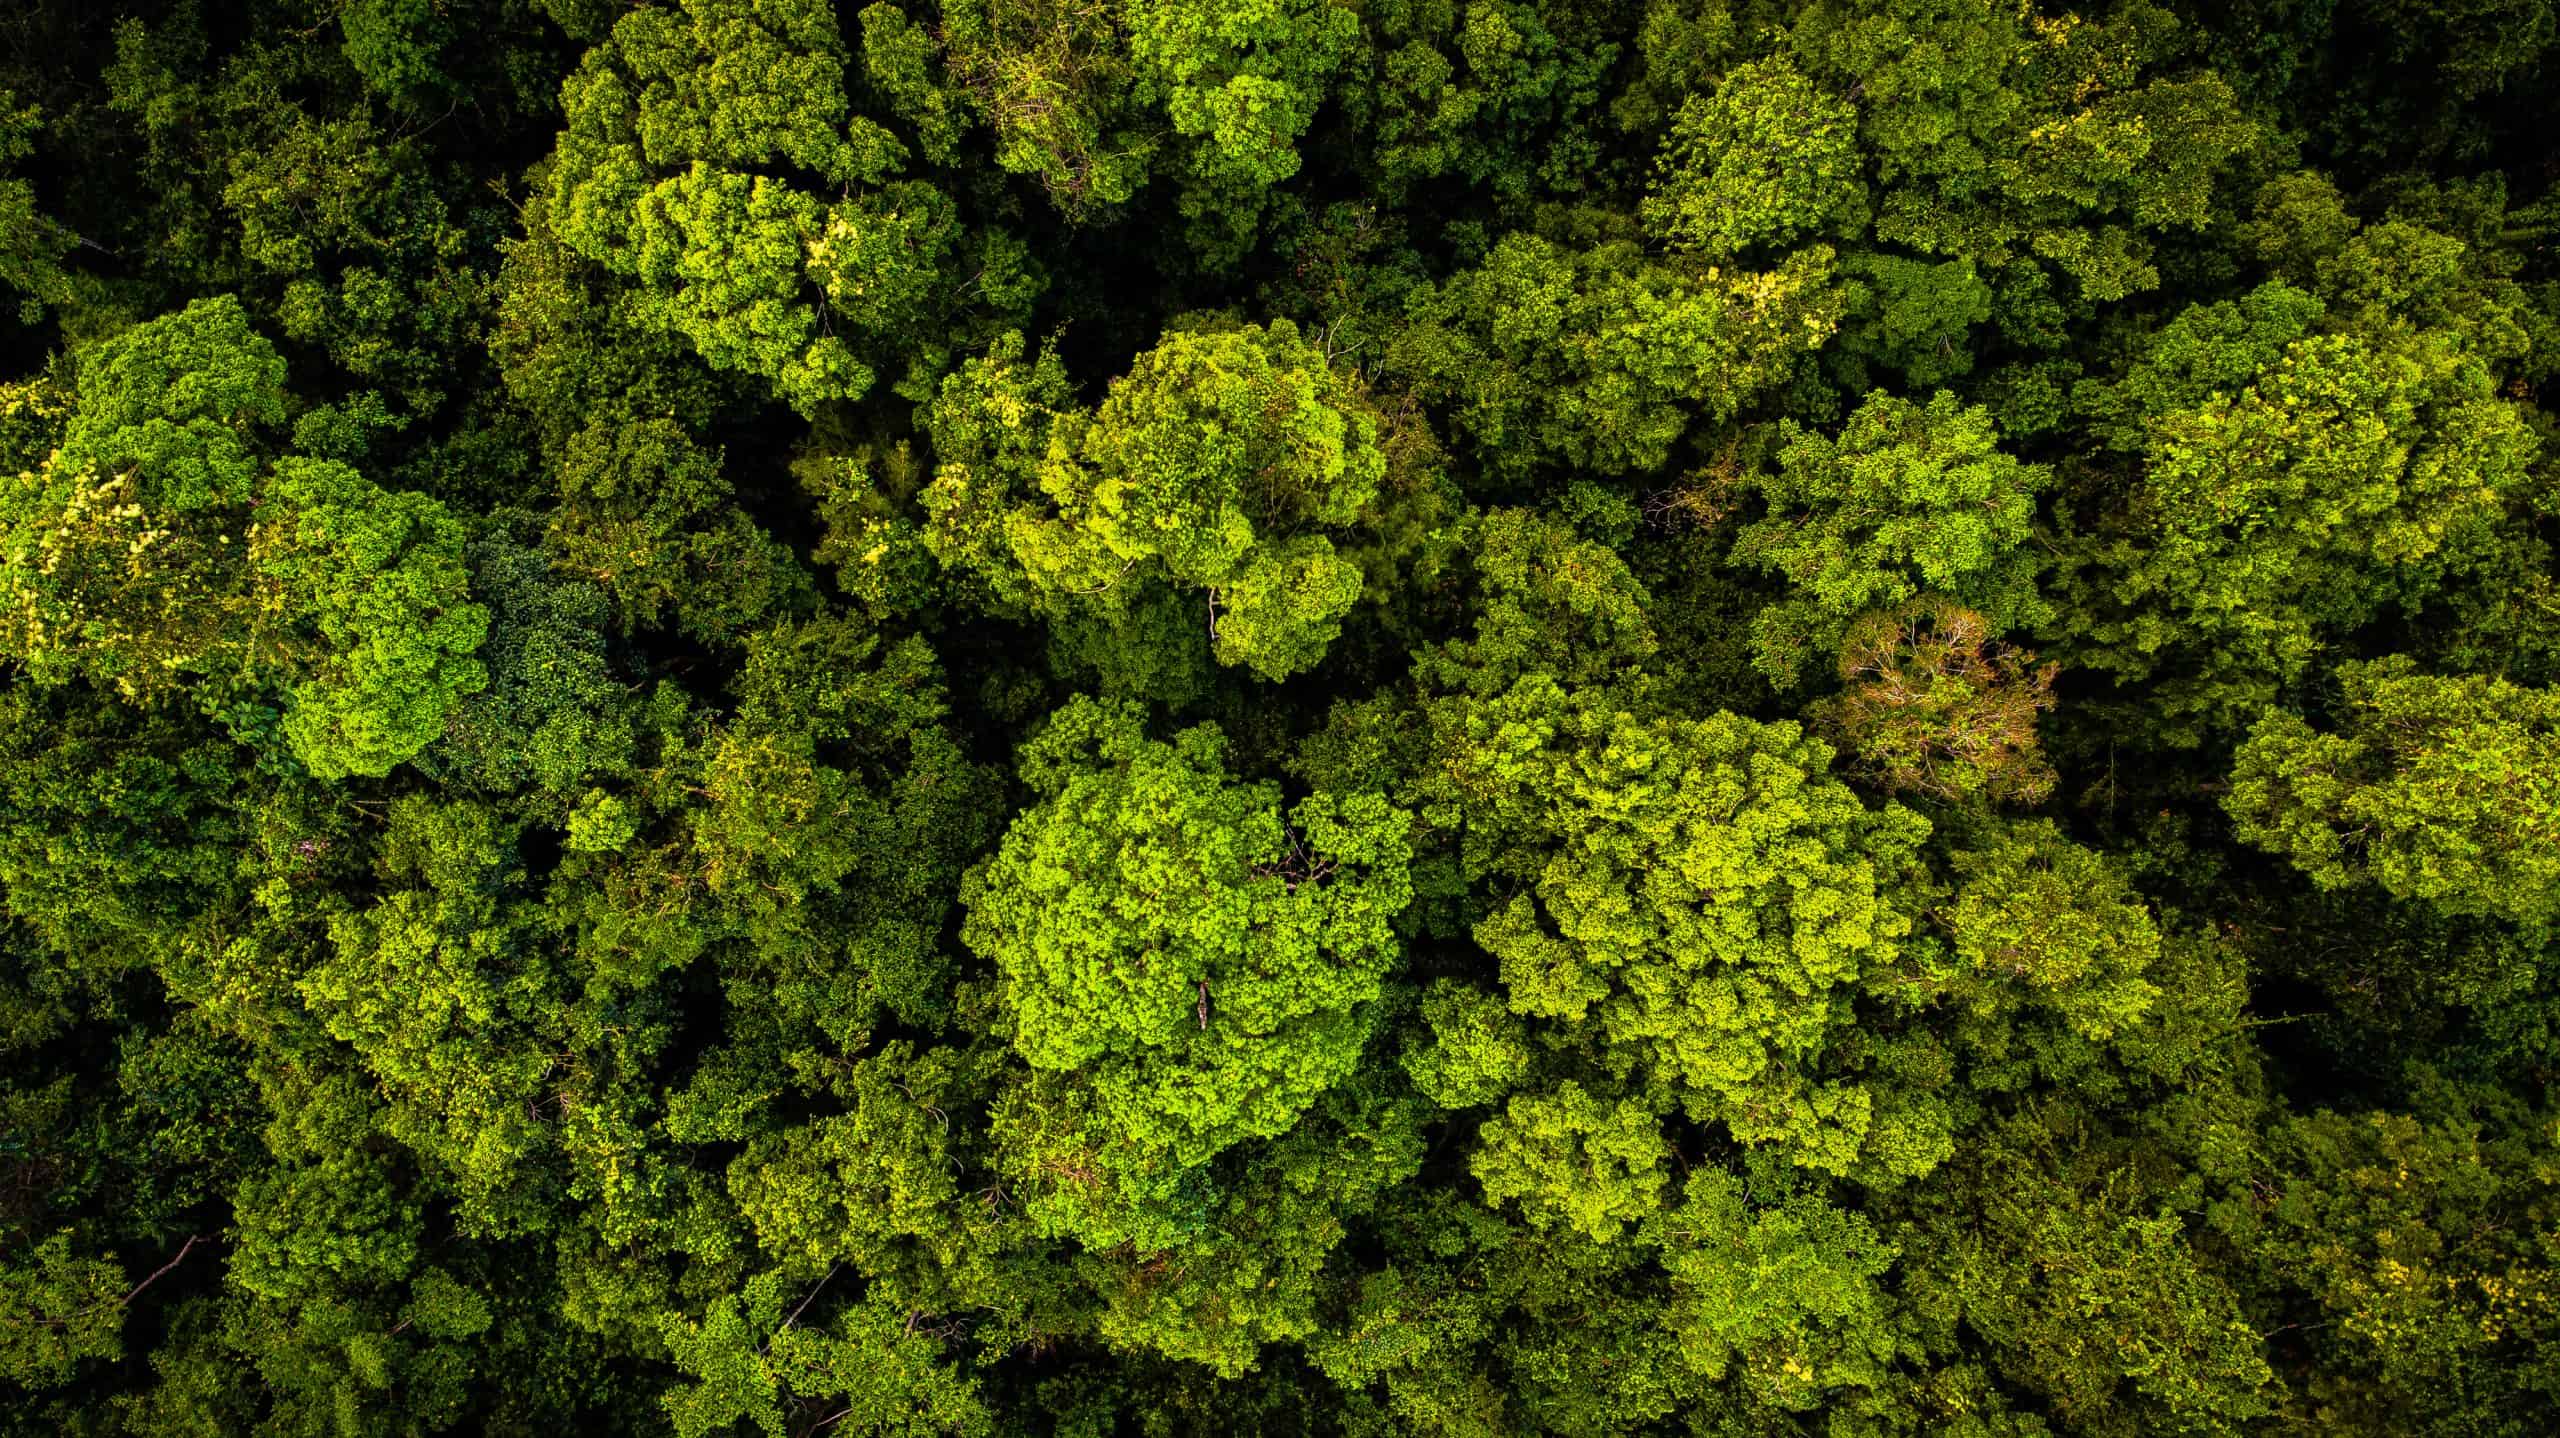 8 Reasons We Need To Save (Tropical) Forests